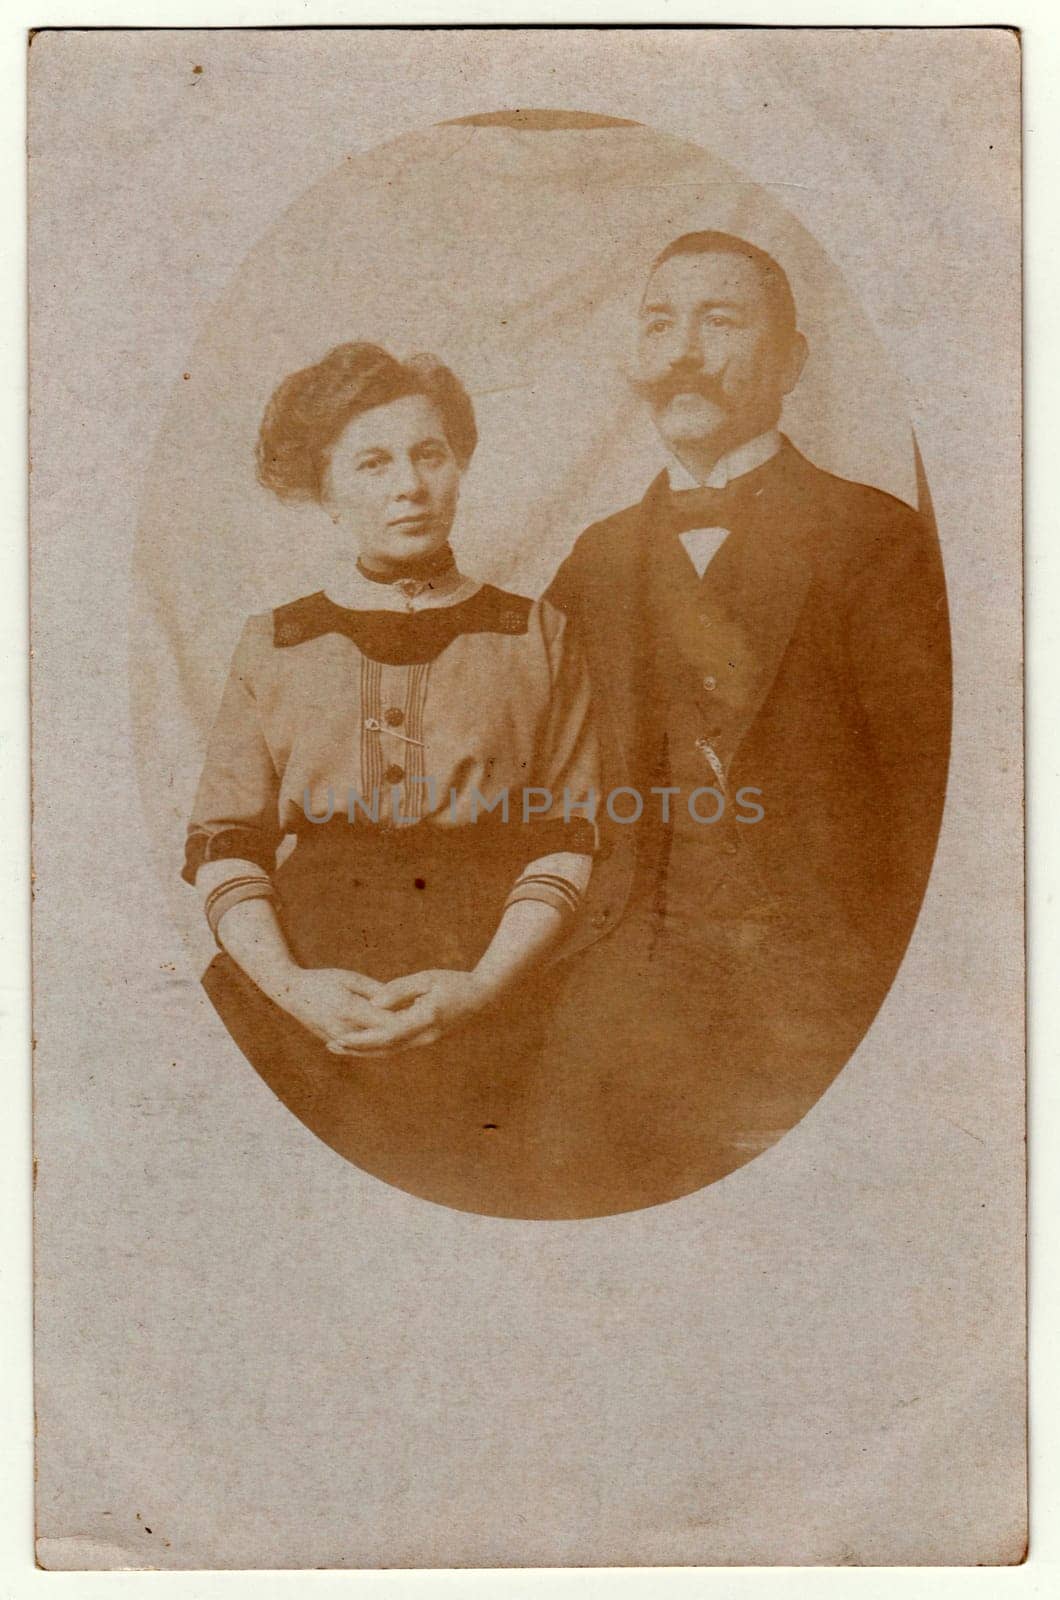 Vintage photo shows women and man - married couple. Retro black and white photography with sepia effect. Photo was taken in Austro-Hungarian Empire or also Austro-Hungarian Monarchy by roman_nerud